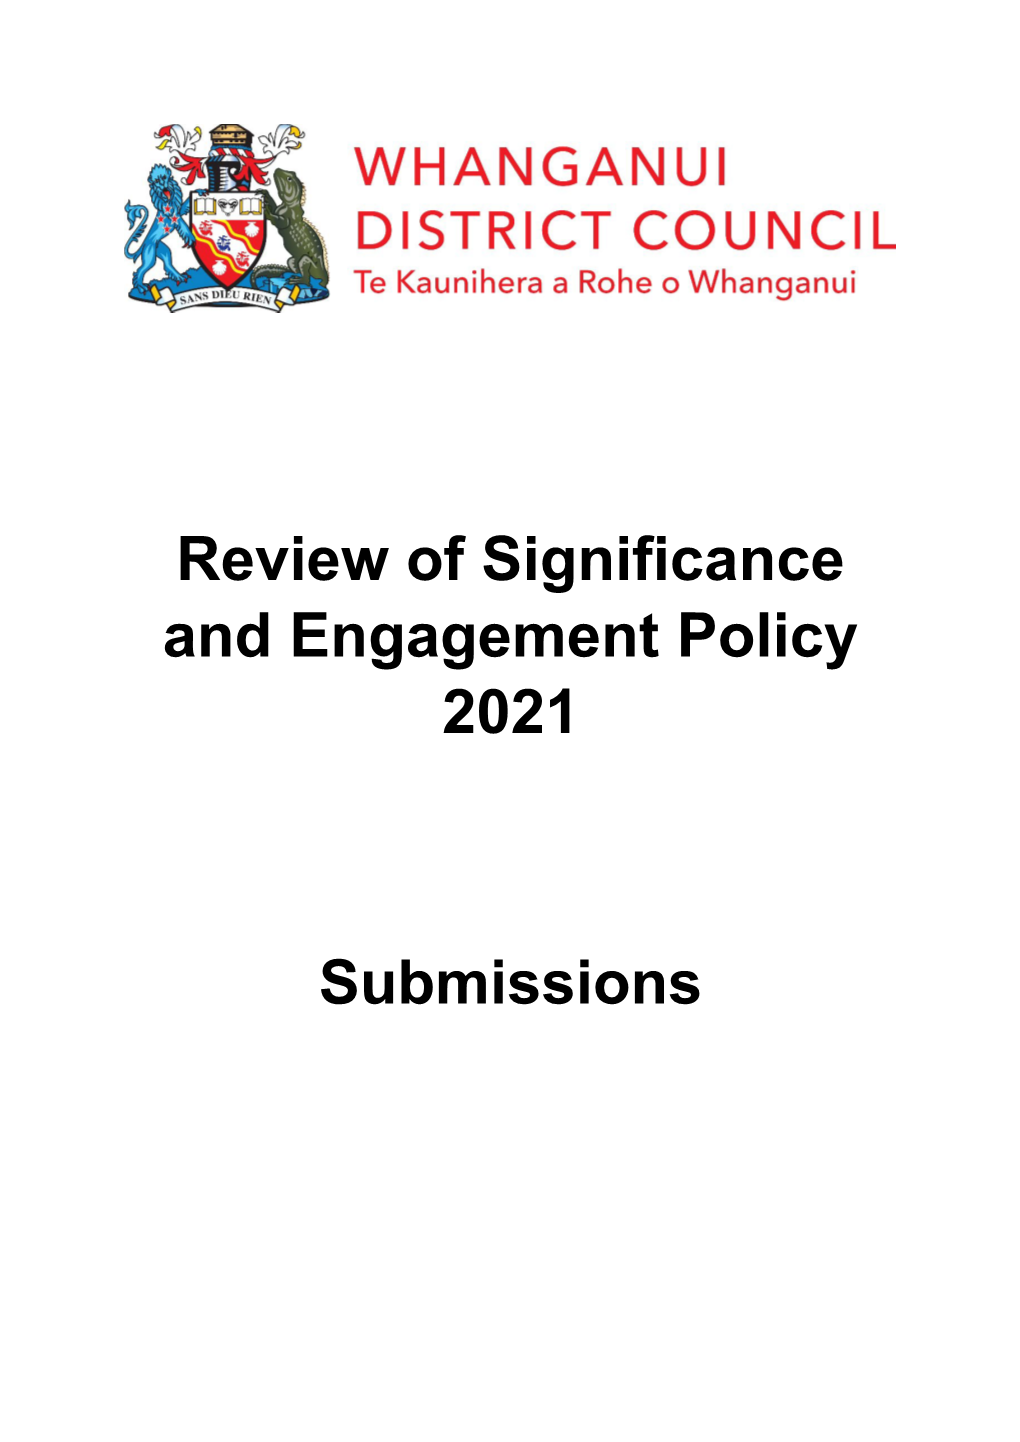 Review of Significance and Engagement Policy 2021